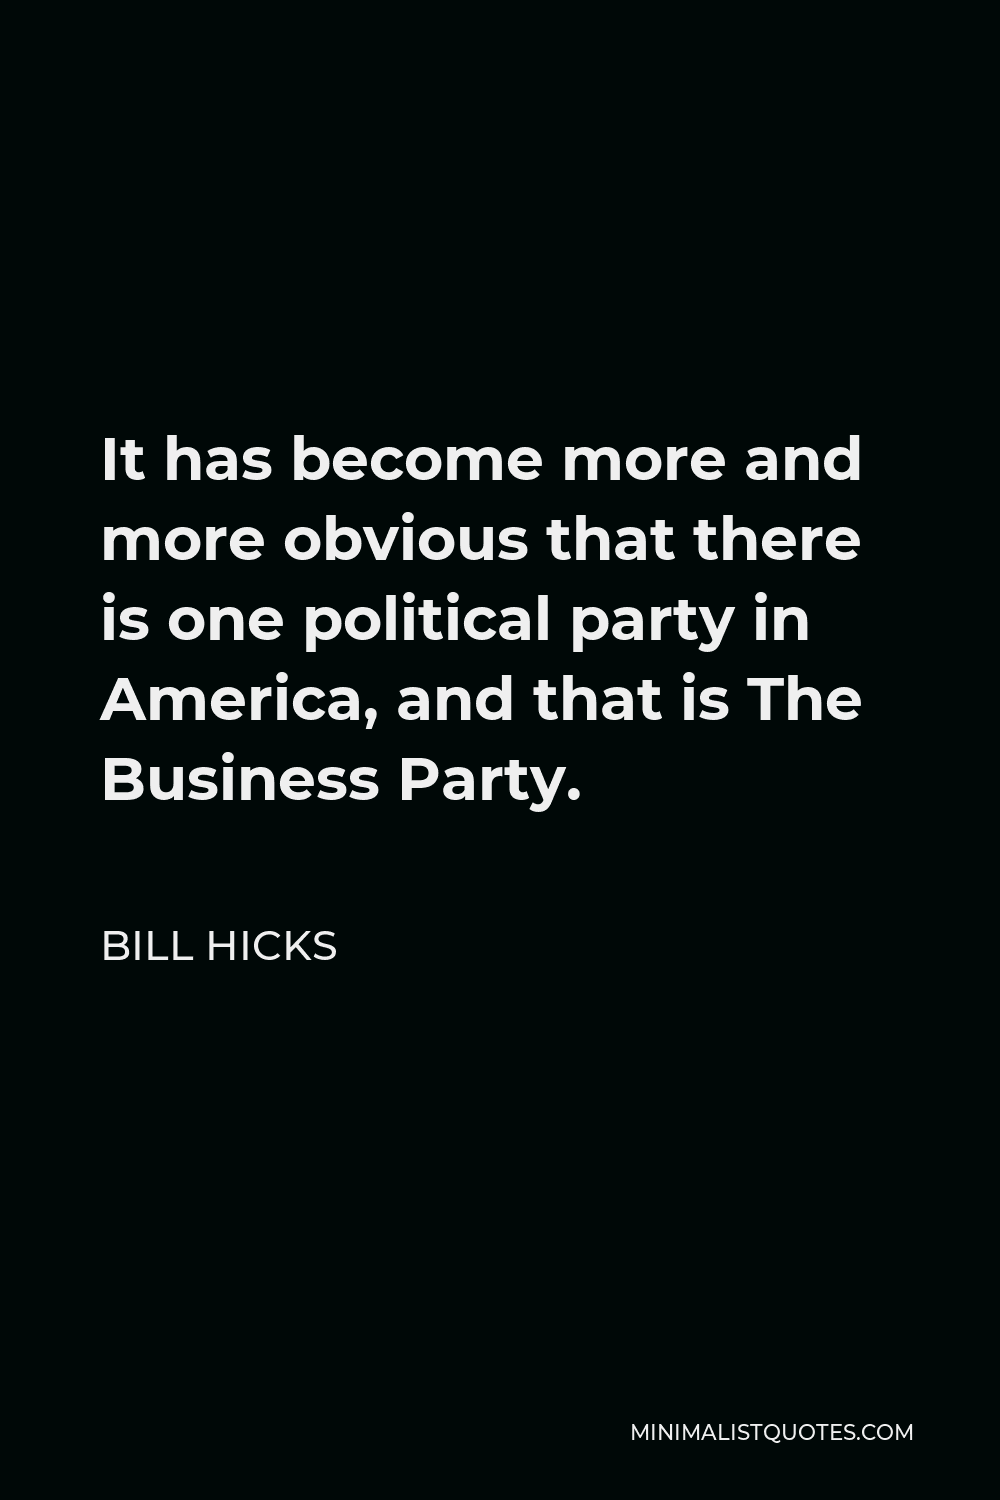 Bill Hicks Quote - It has become more and more obvious that there is one political party in America, and that is The Business Party.